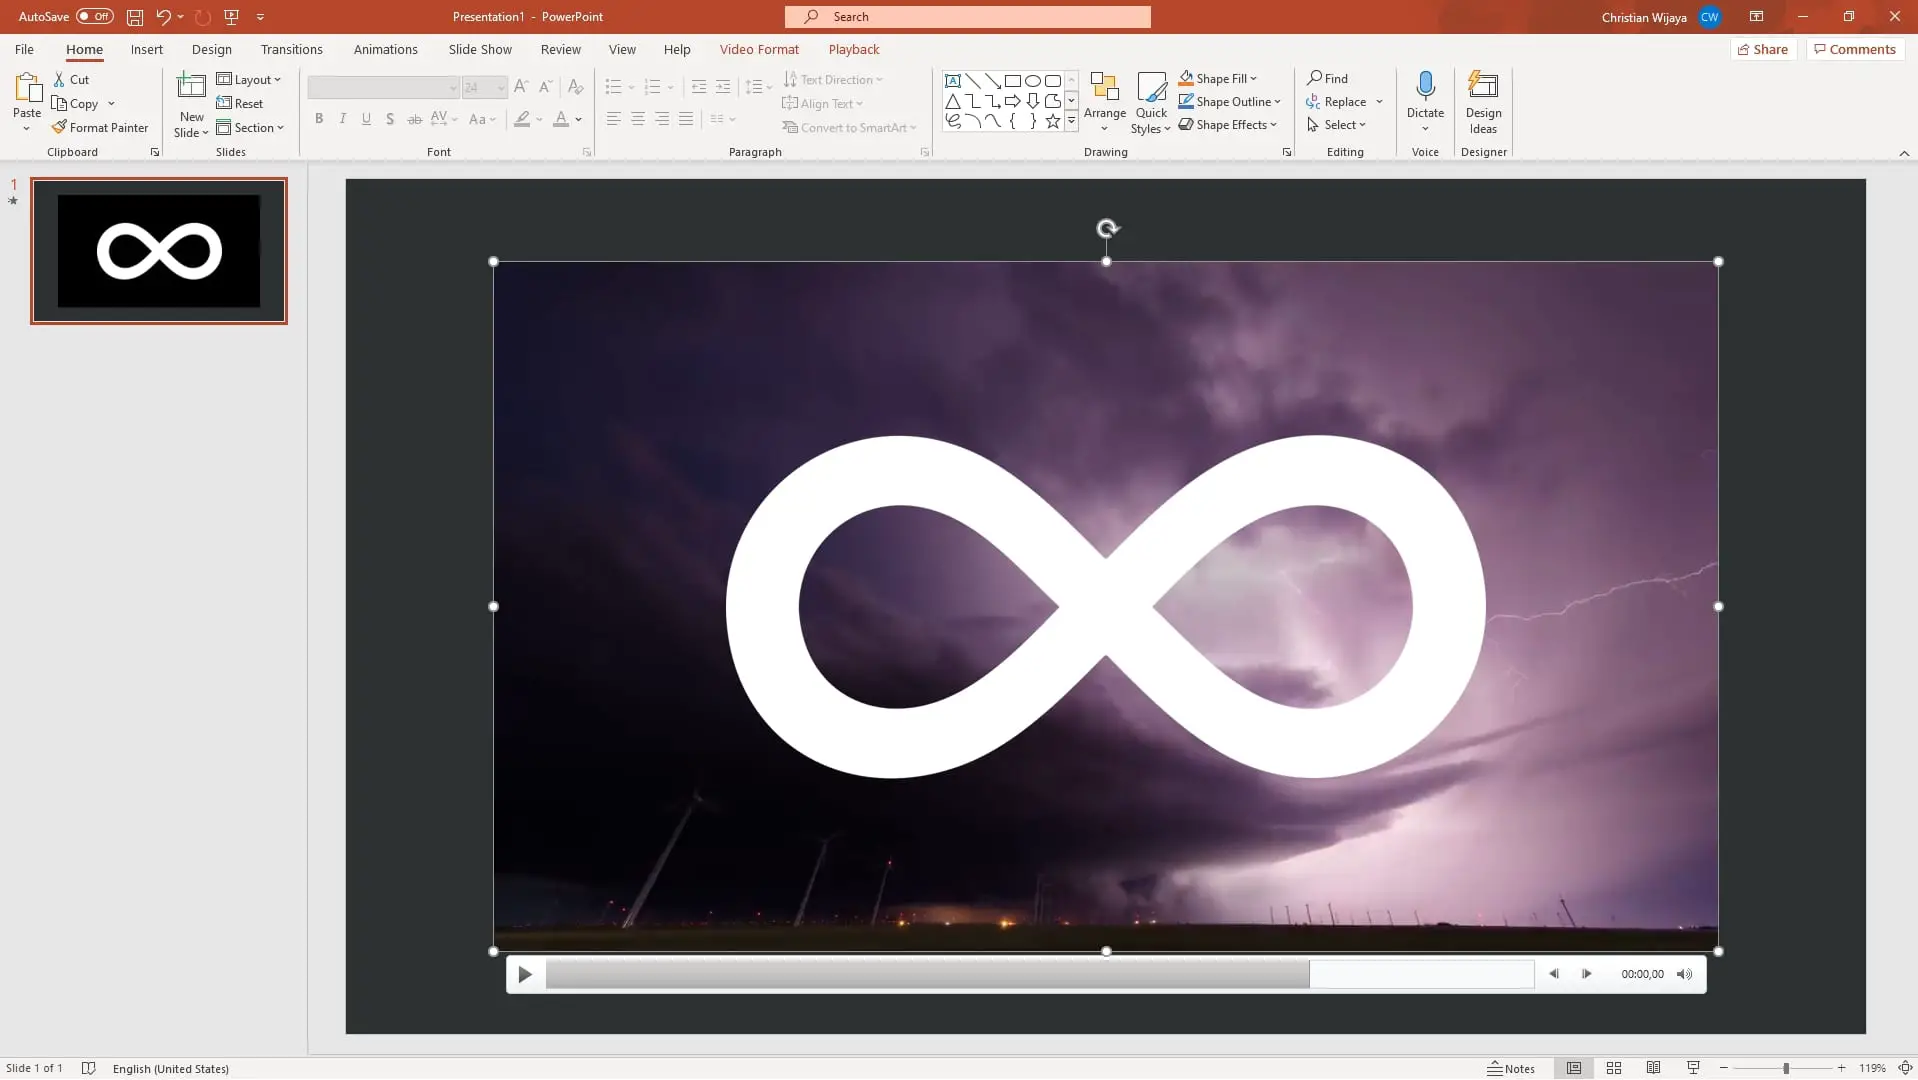 How to Loop a Video in PowerPoint and Play Endlessly - Vegaslide